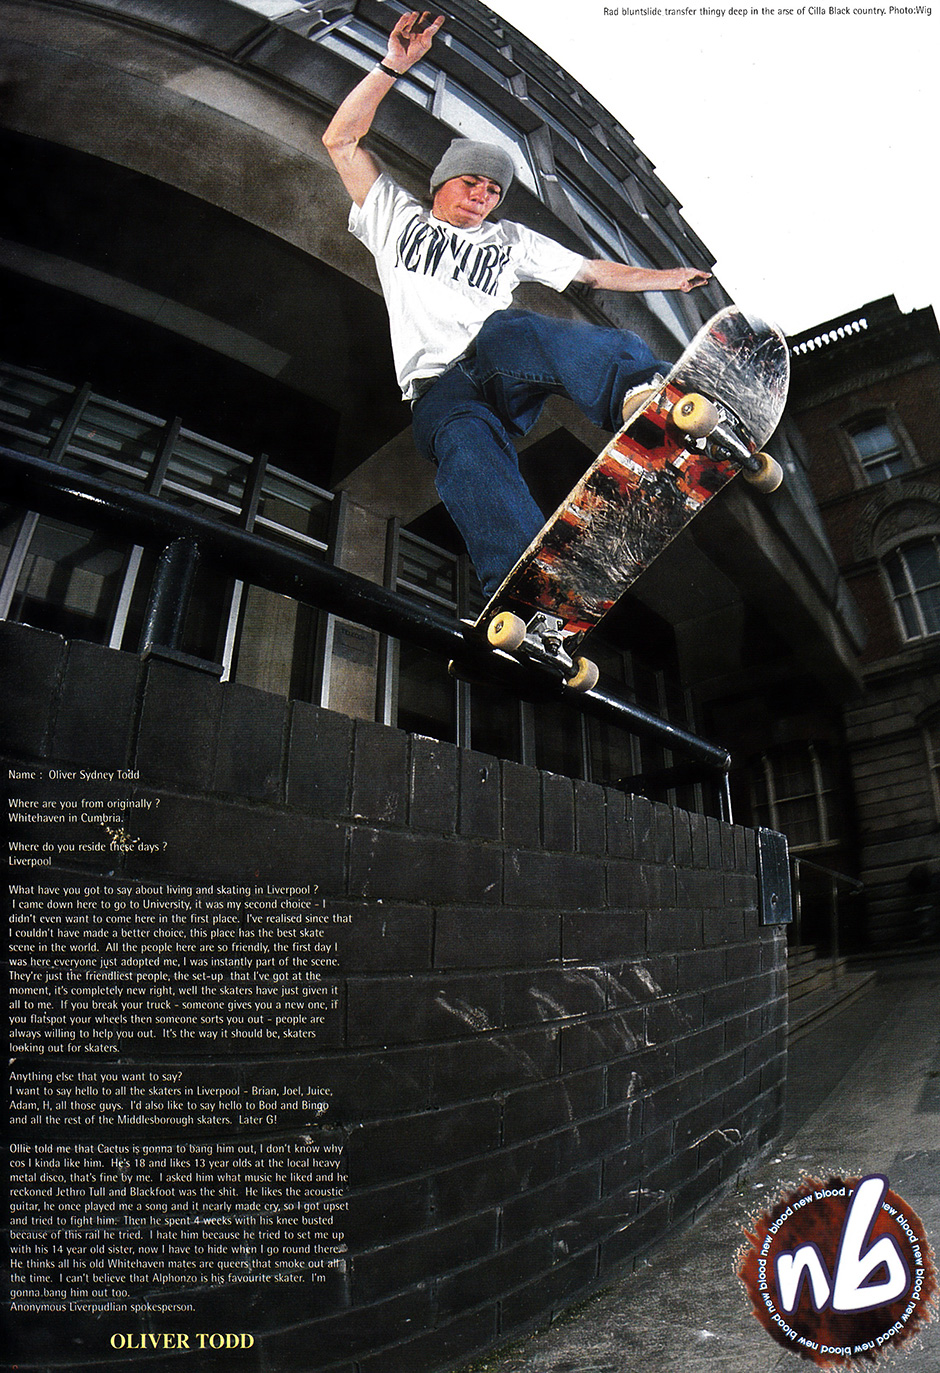 Olly Todd's New Blood in Sidewalk Magazine in 1996, familiar front blunt shot by Wig Worland